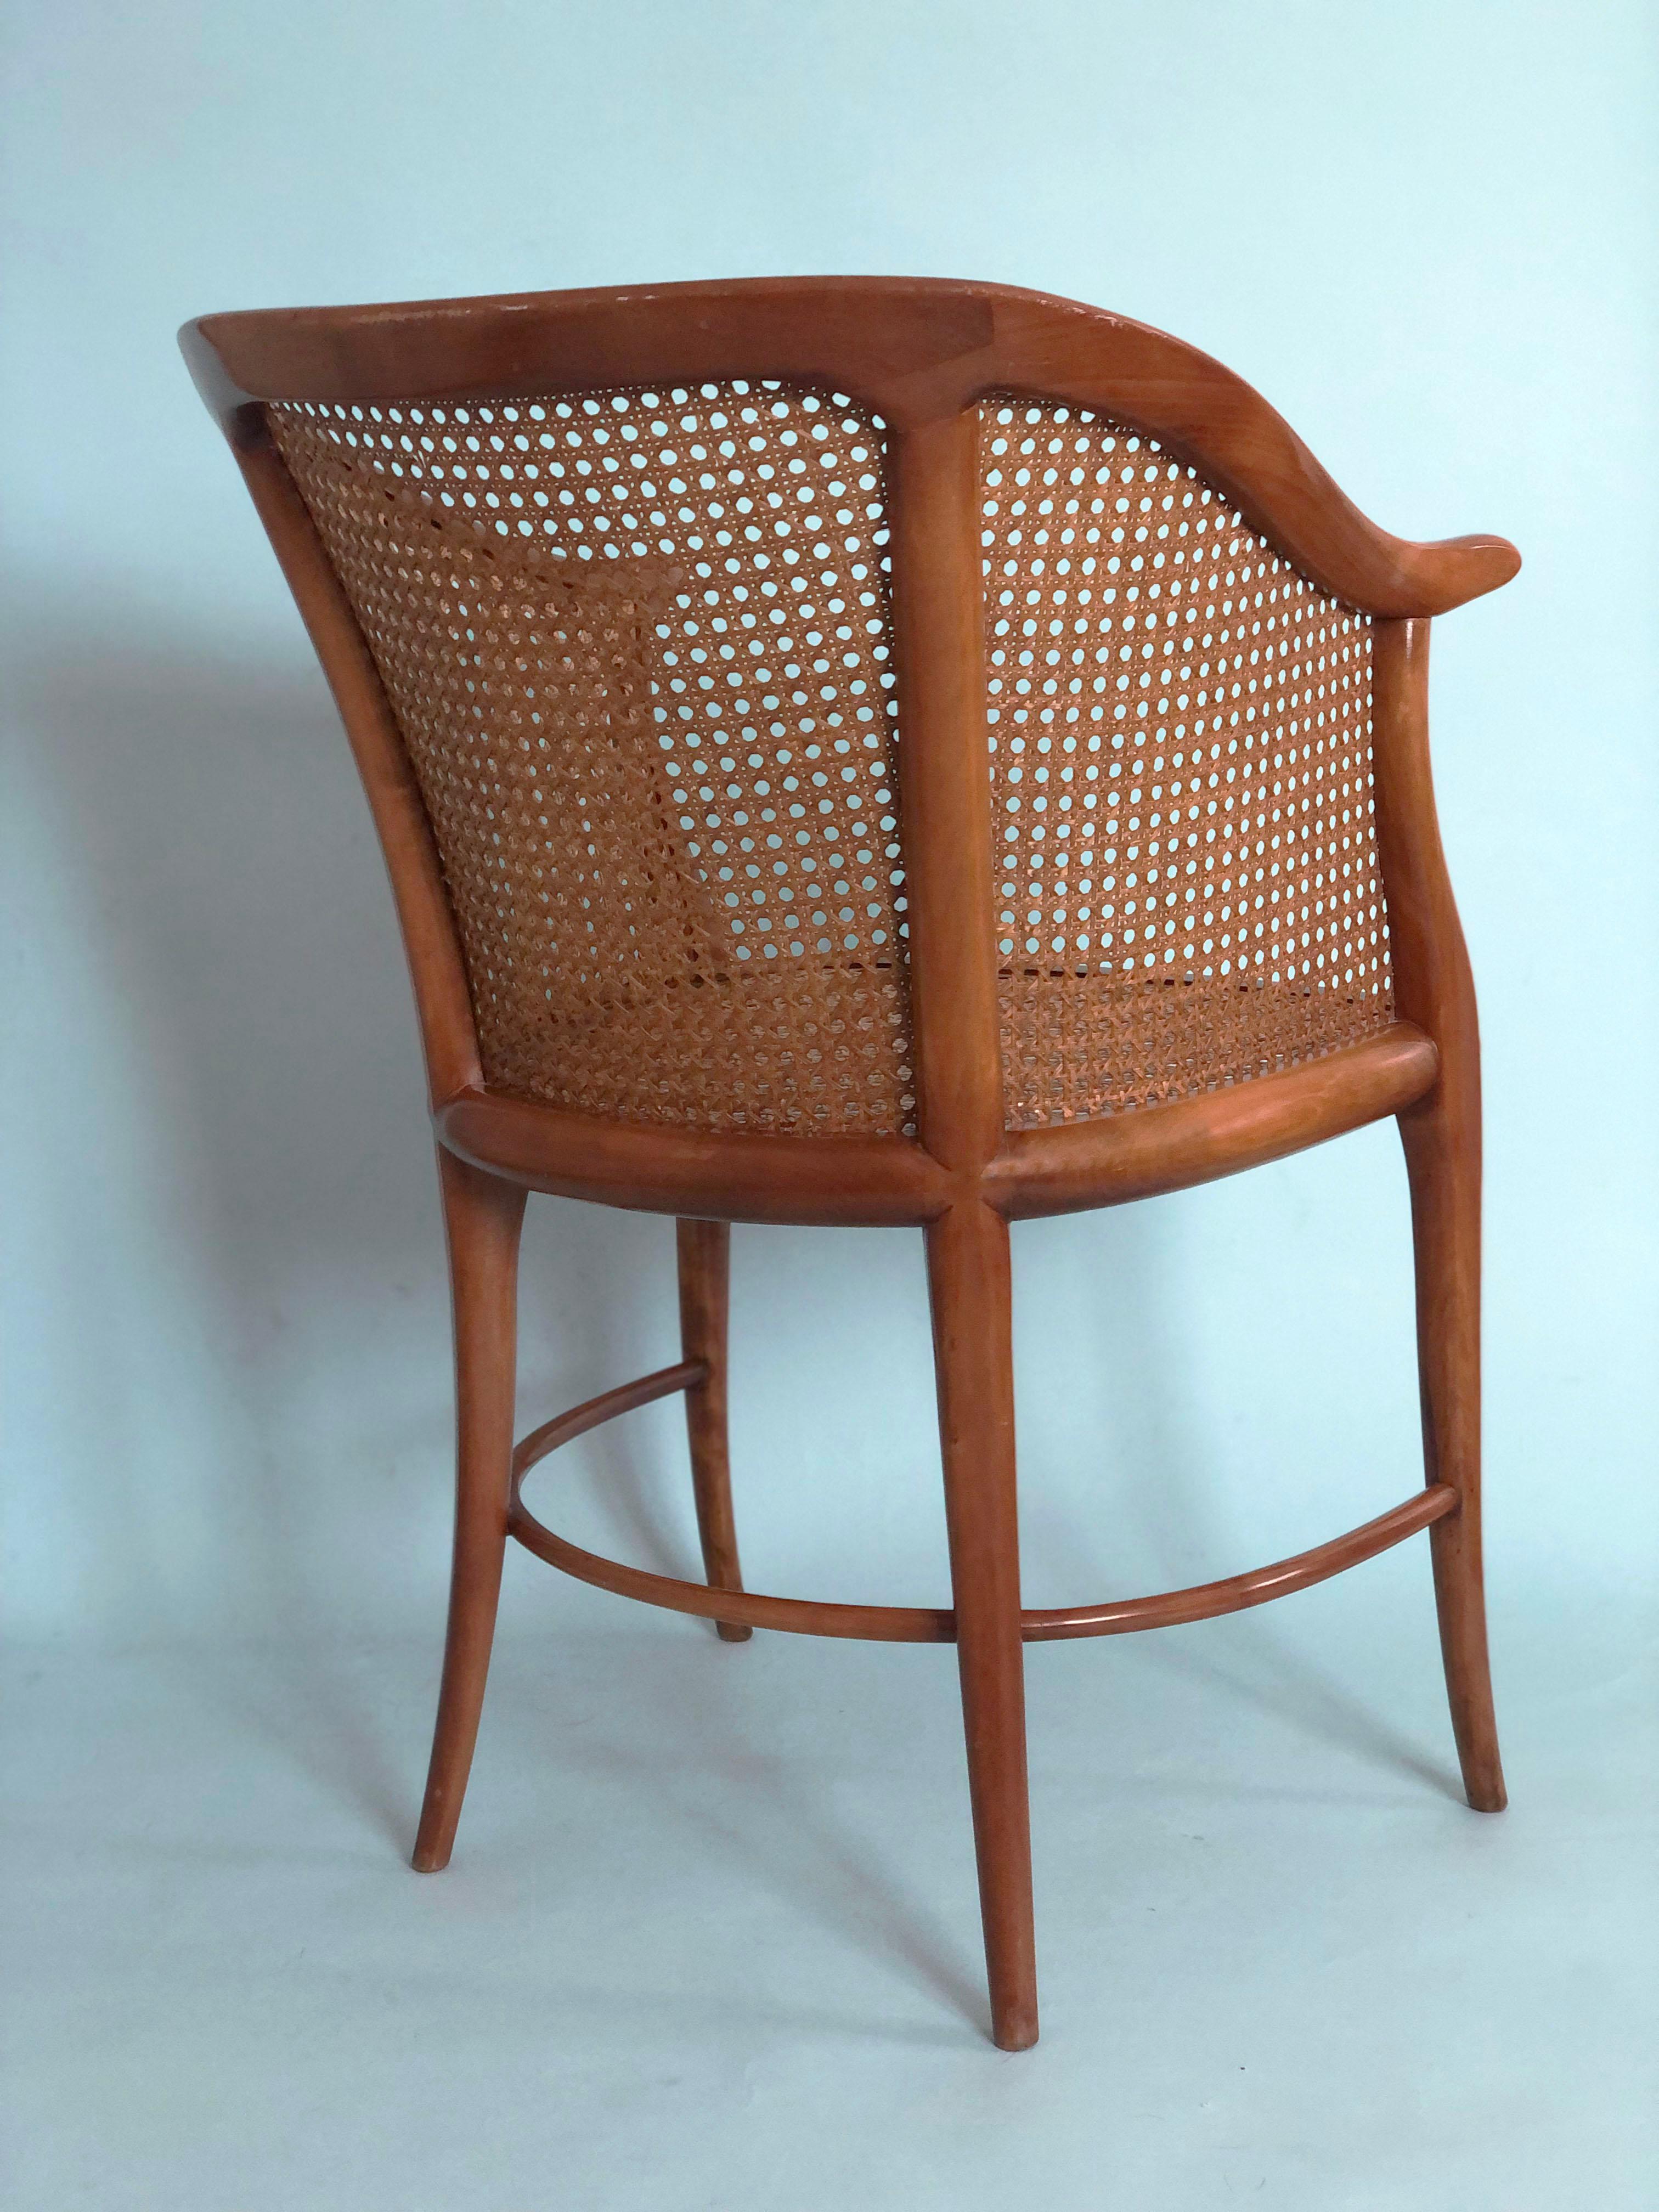 Annibale Colombo Design Chair. An unique and high-quality piece that effortlessly blends style and craftsmanship. Solid cherry wood and cane in very good condition.
This item is marked and registered by the manufacturer with the number